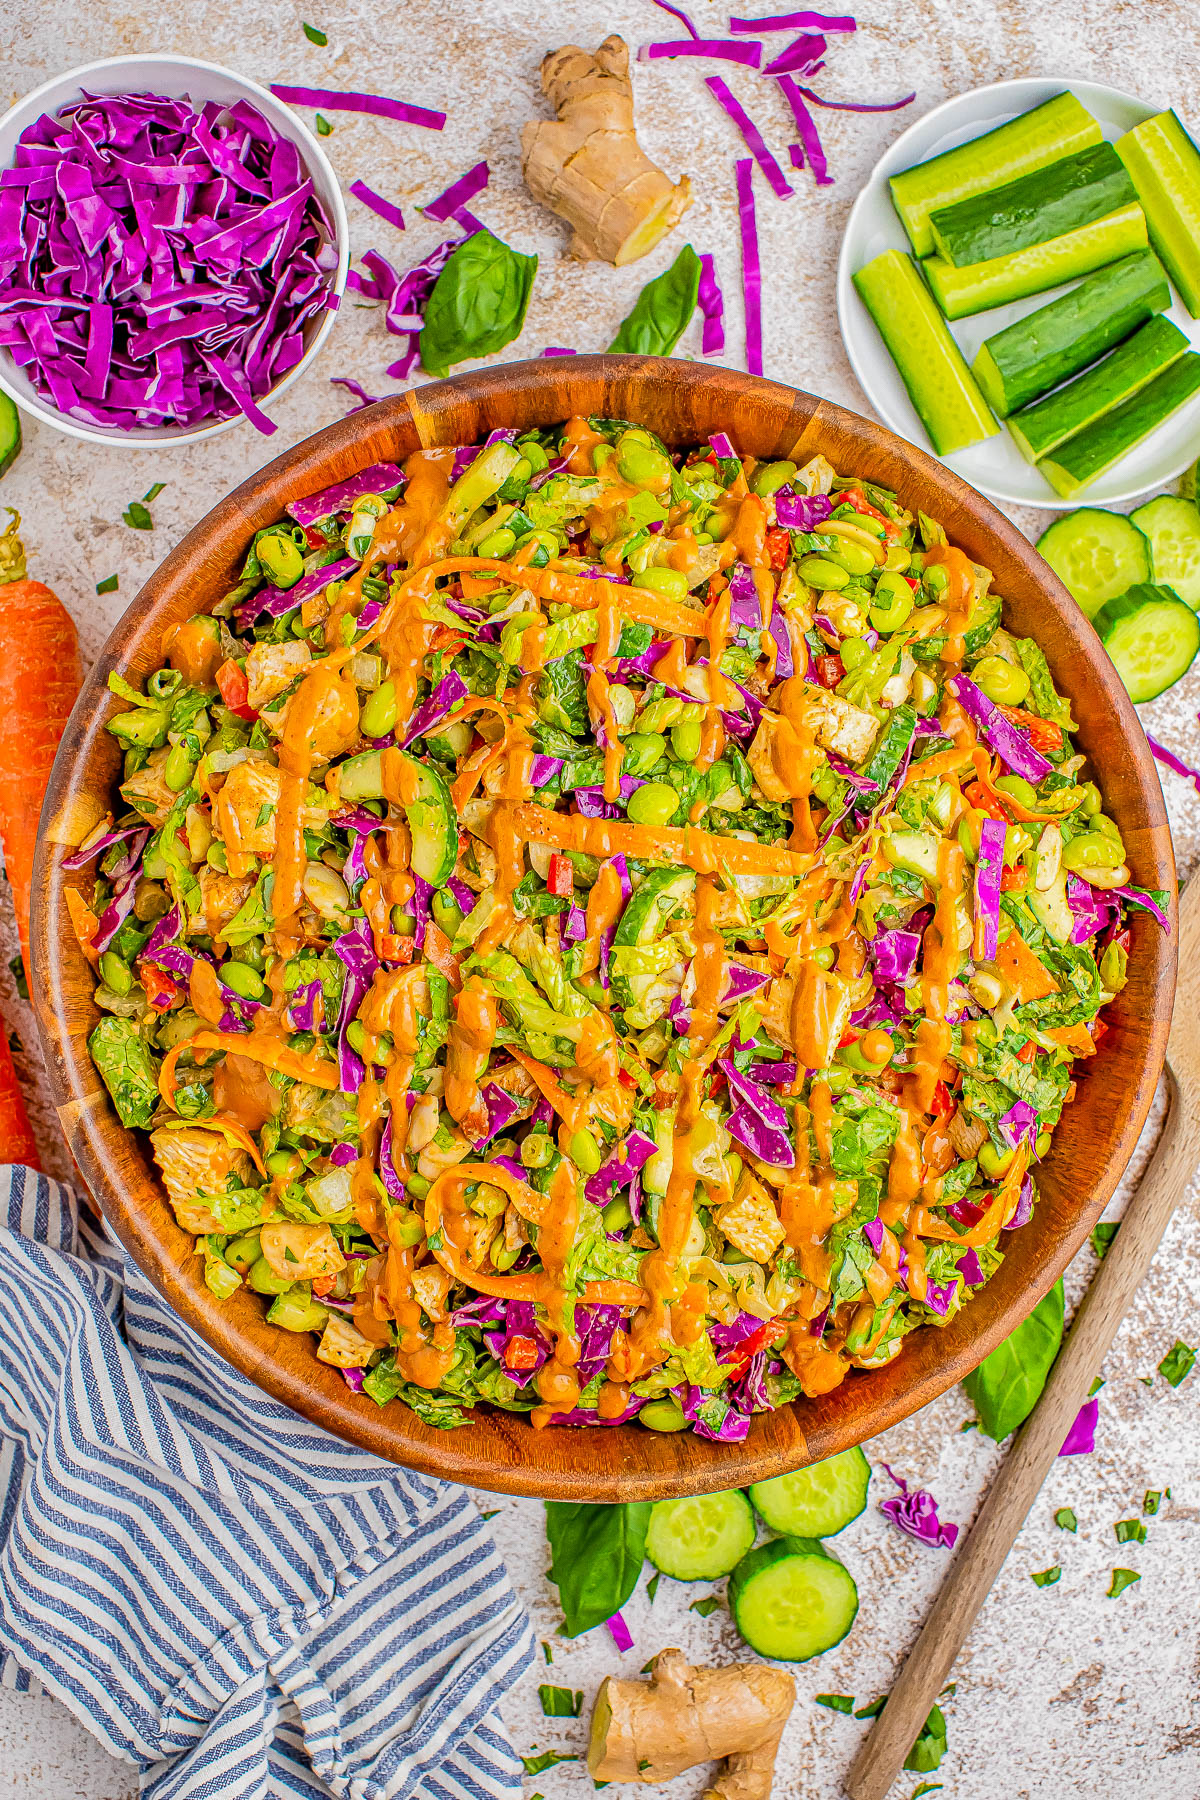 A colorful salad in a wooden bowl, featuring lettuce, purple cabbage, cucumber, carrots, edamame, and orange dressing. Plates with cucumber sticks and shredded purple cabbage are on the side. A striped cloth is nearby.